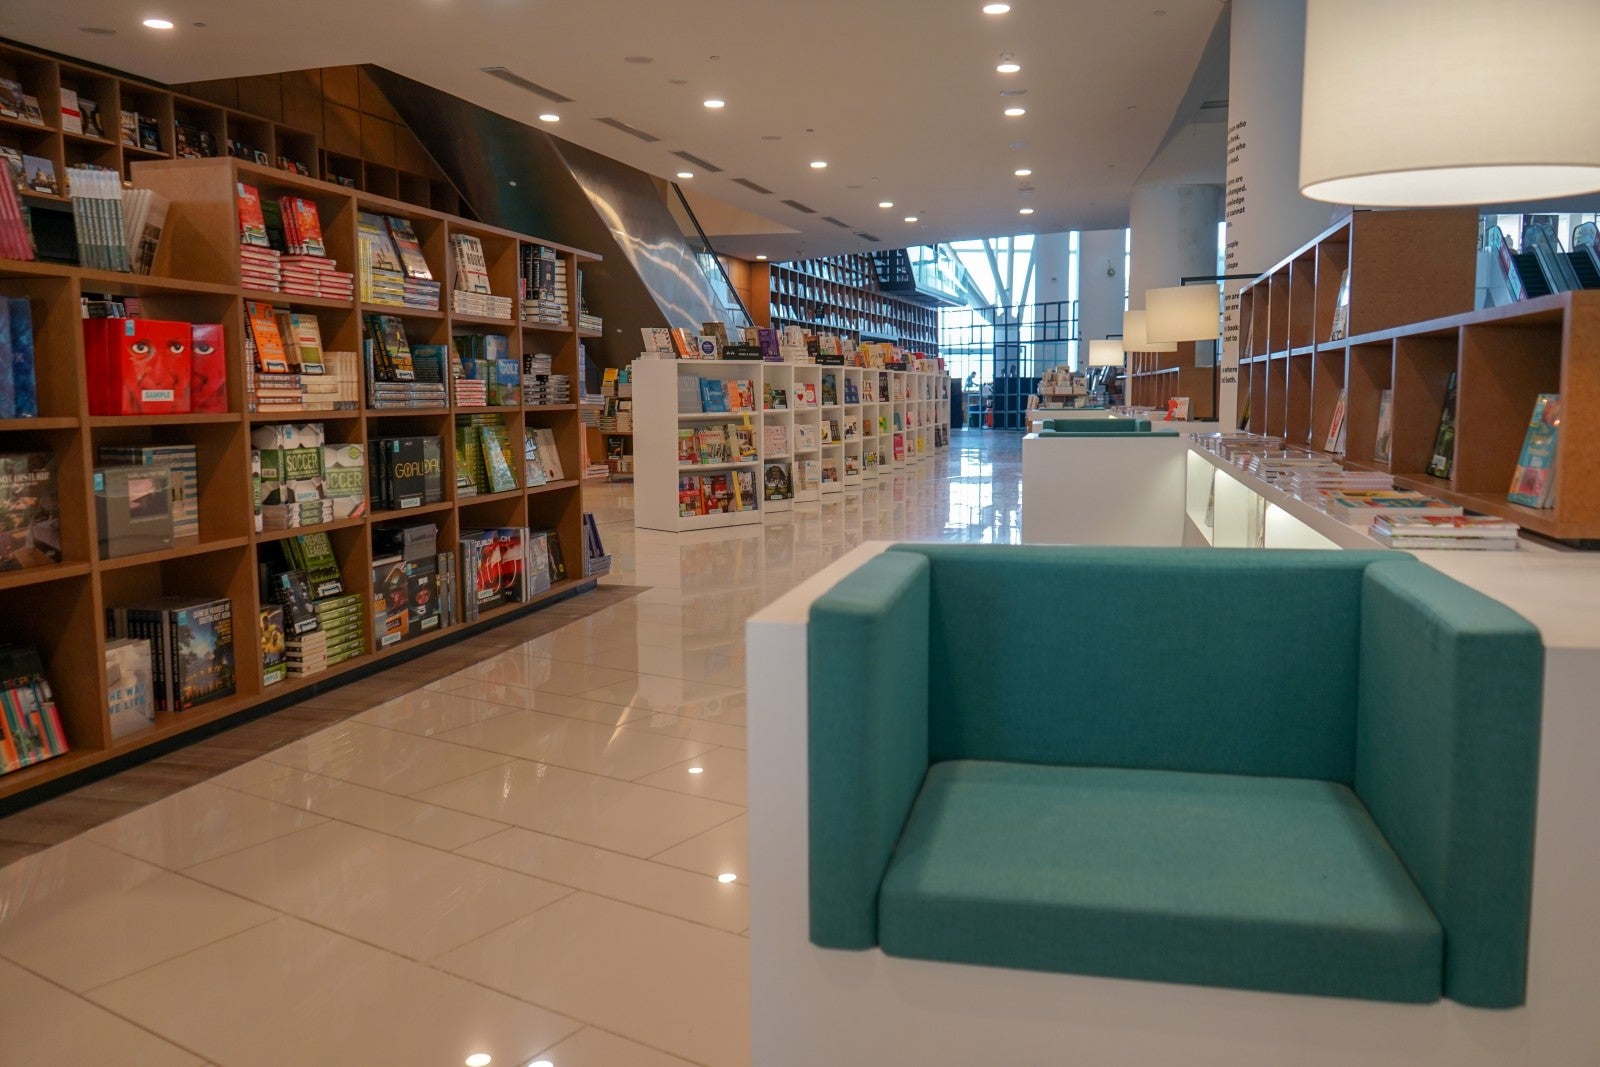 Bookxcess Just Opened Its First Outlet In Penang &Amp; It Looks Like A Bookworm's Paradise! - World Of Buzz 3